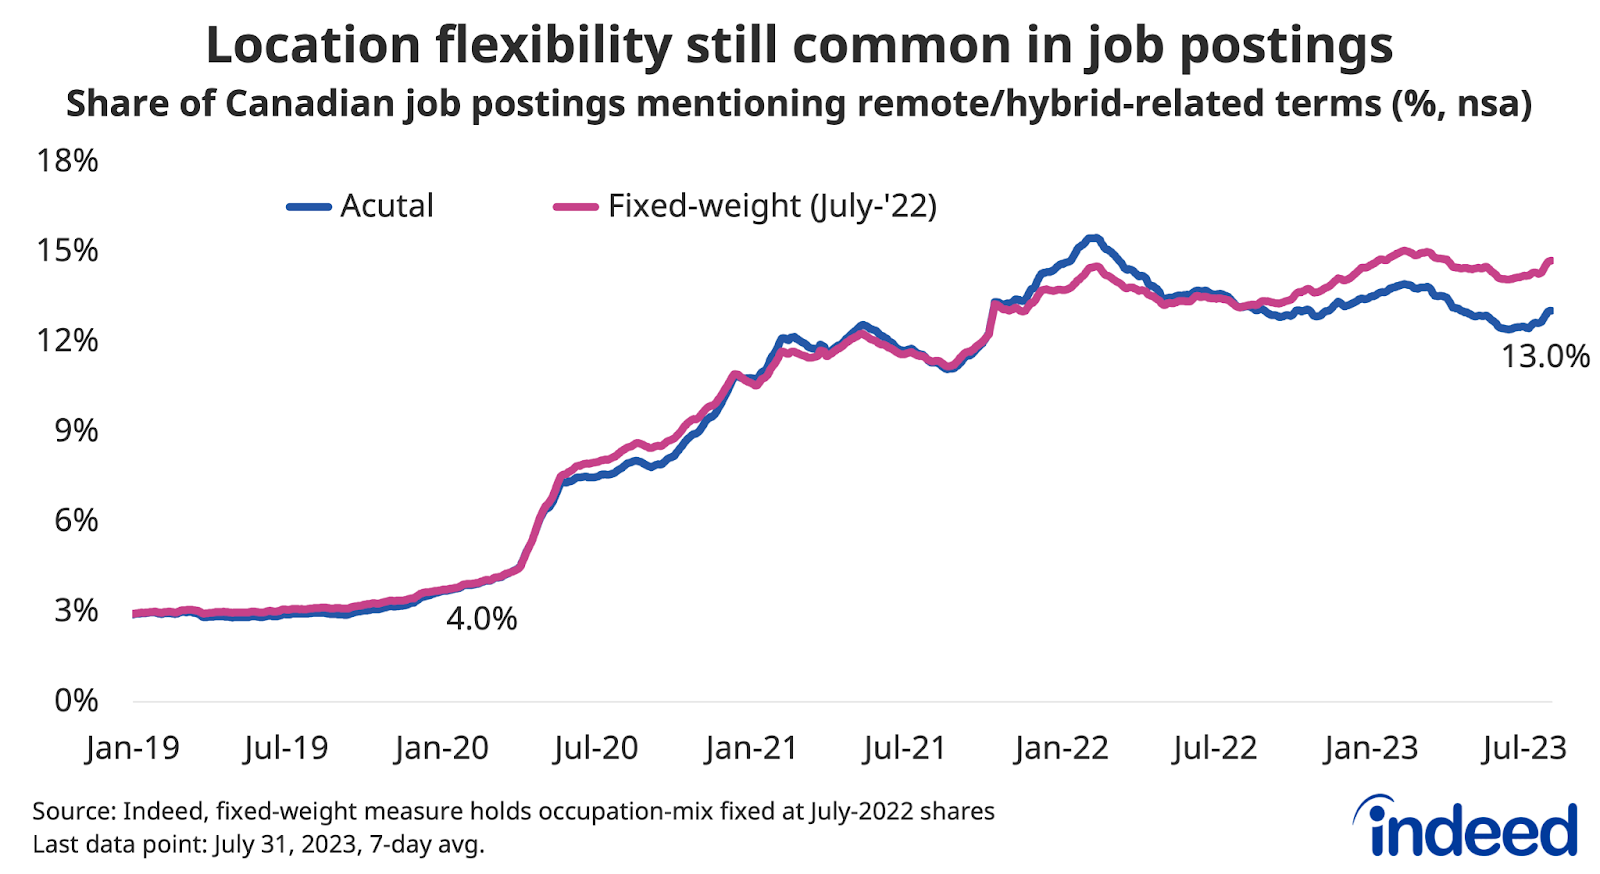 Line chart titled “Location flexibility still common in job postings,” shows the share of Canadian job postings mentioning remote/hybrid-related terms, between January 2019 and July 2023. As of July 31, 2023, 13.0% of job postings mentioned location flexibility, similar to their share a year earlier, and up from 4.0% in early 2020.  